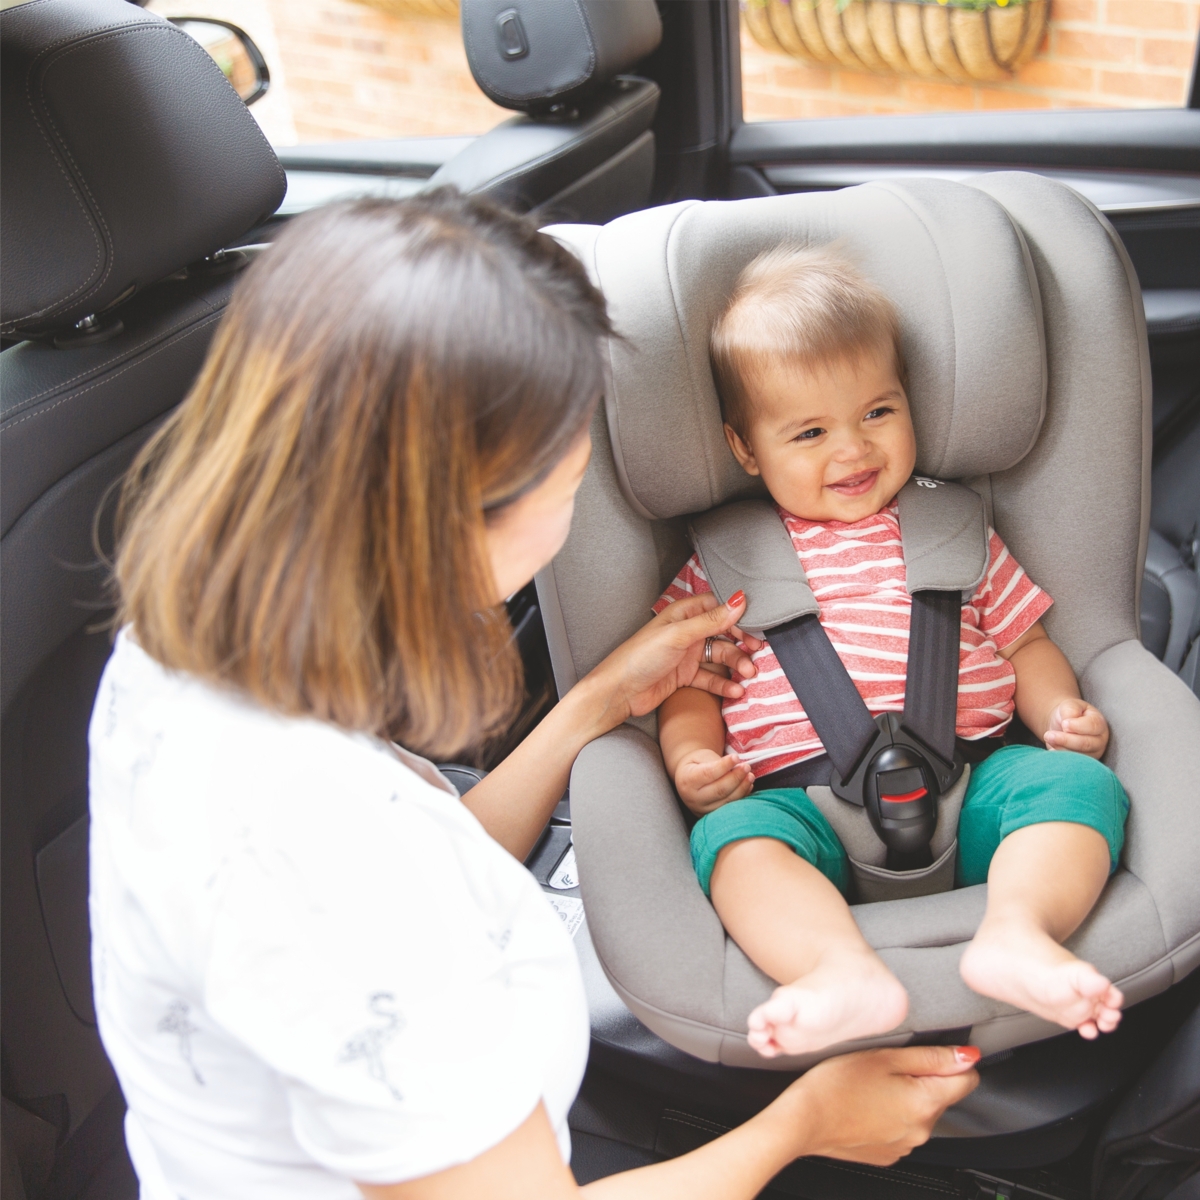 Joie i-Spin 360 i-Size Car Seat - Coal with Seat Protector and